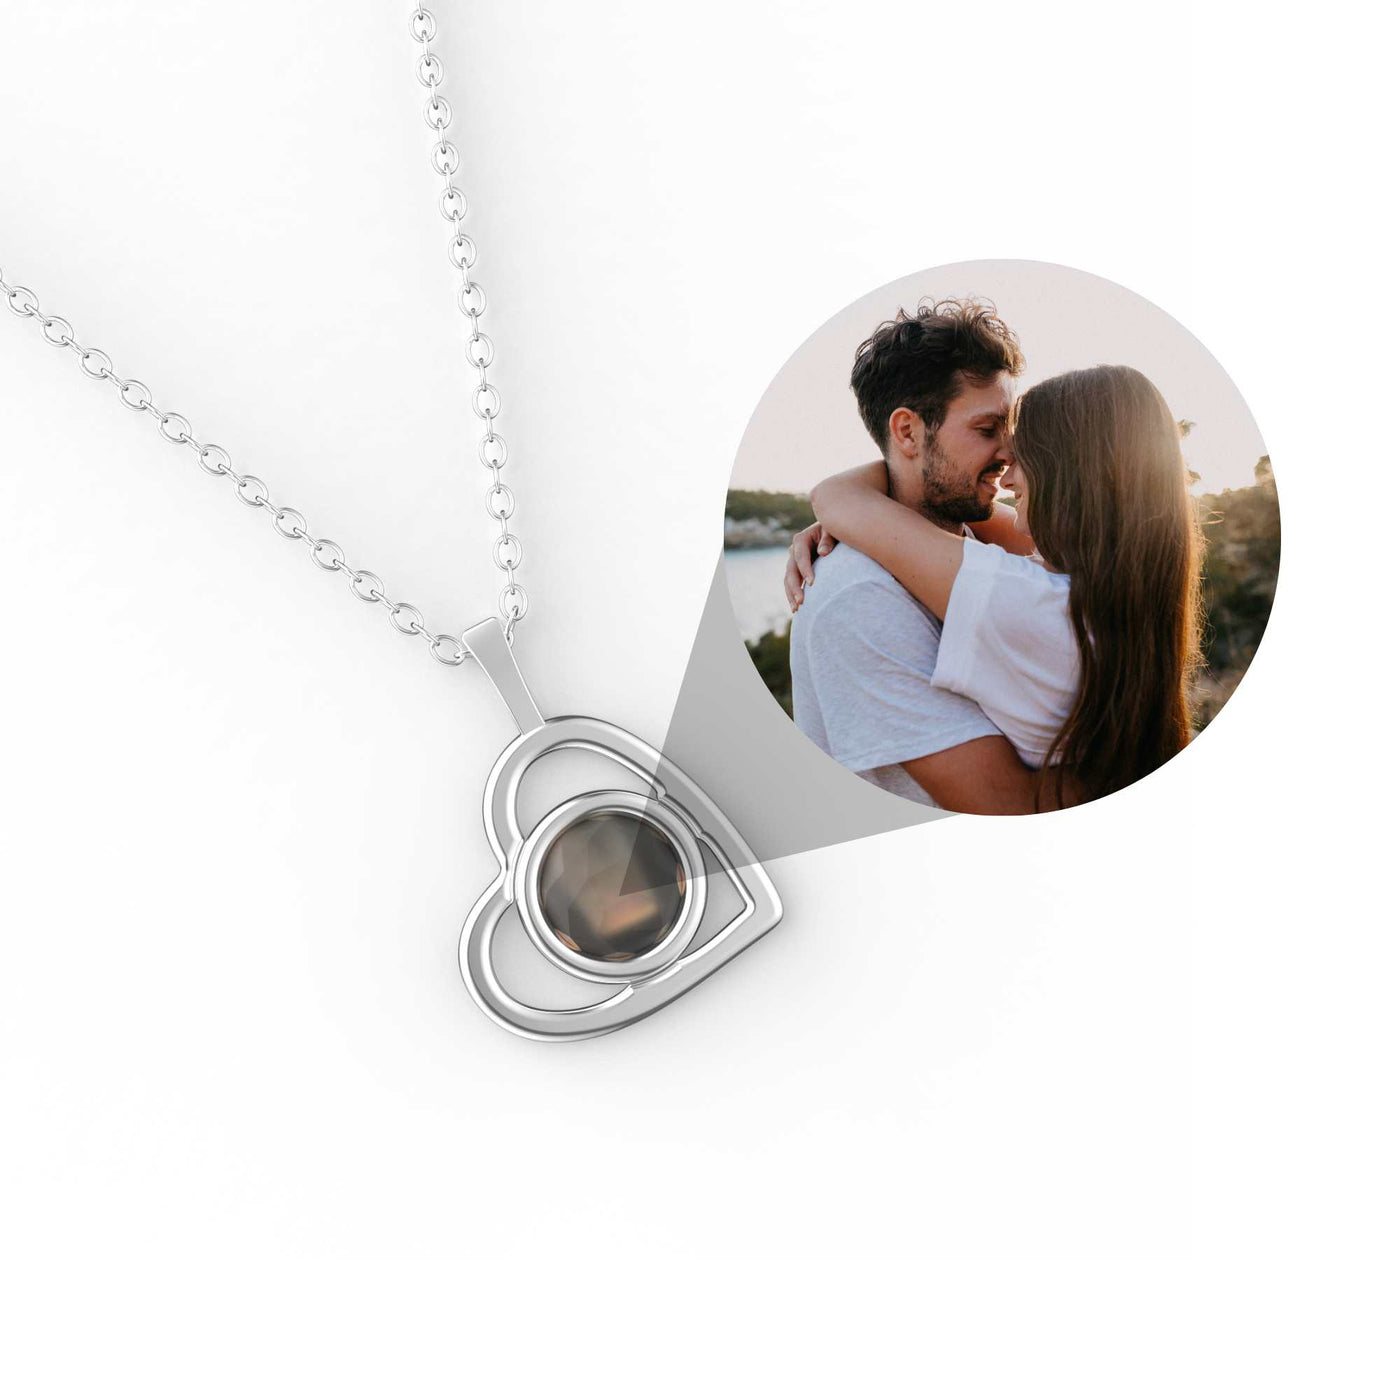 Wearitlove™ Personalized Photo Bracelet/Necklace/Keychain【BUY 2 GET FREE SHIPPING】